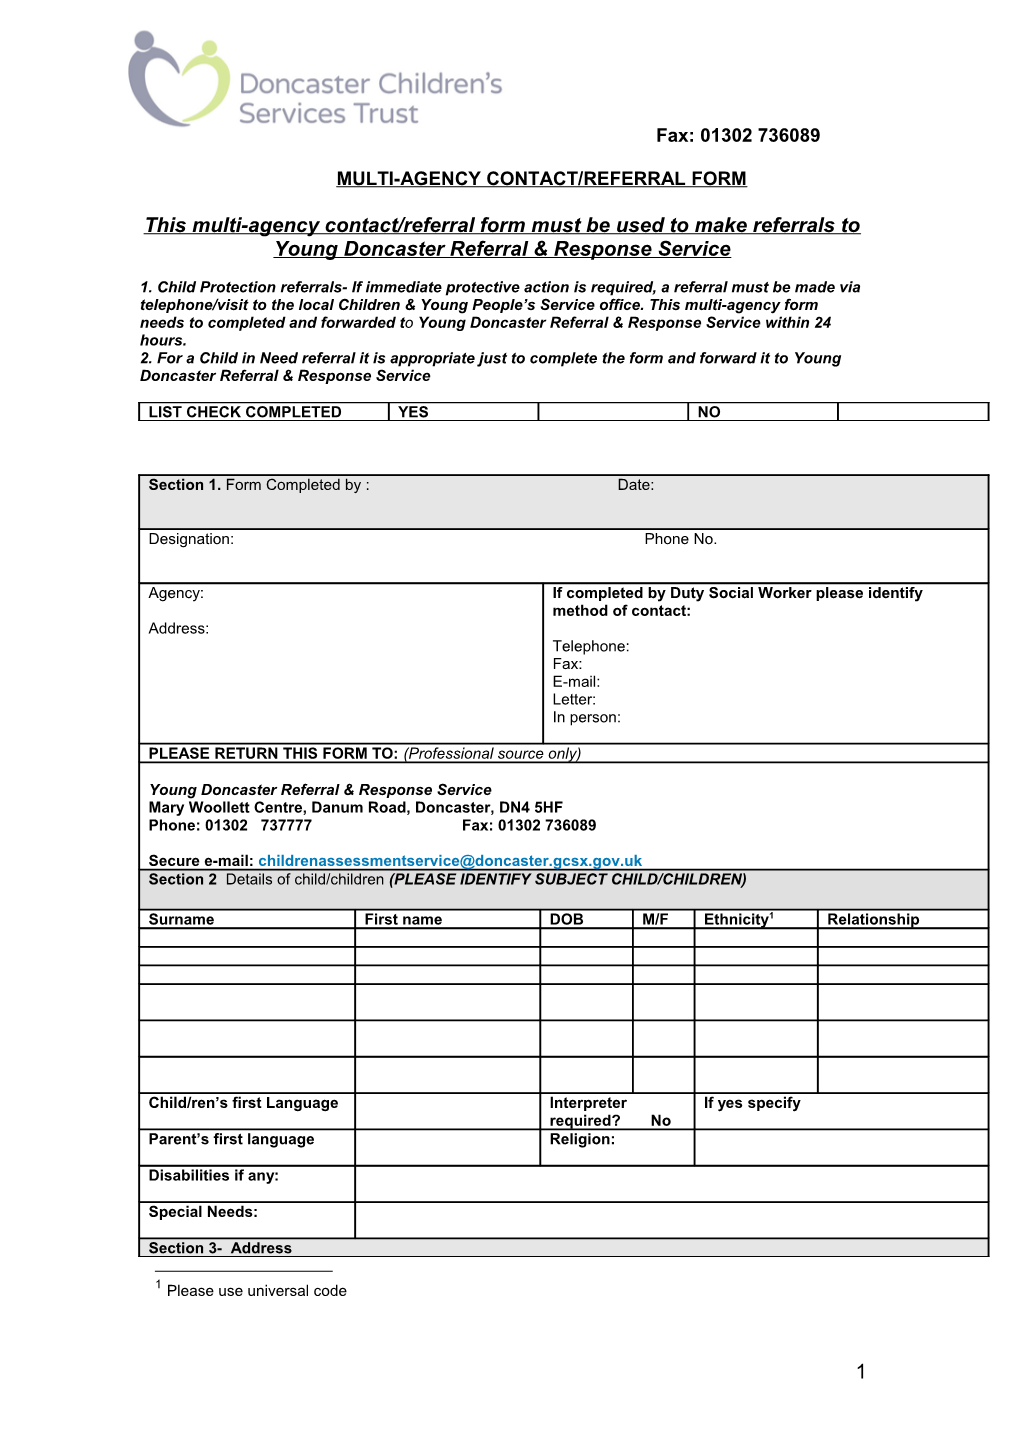 Multi-Agency Contact/Referral Form